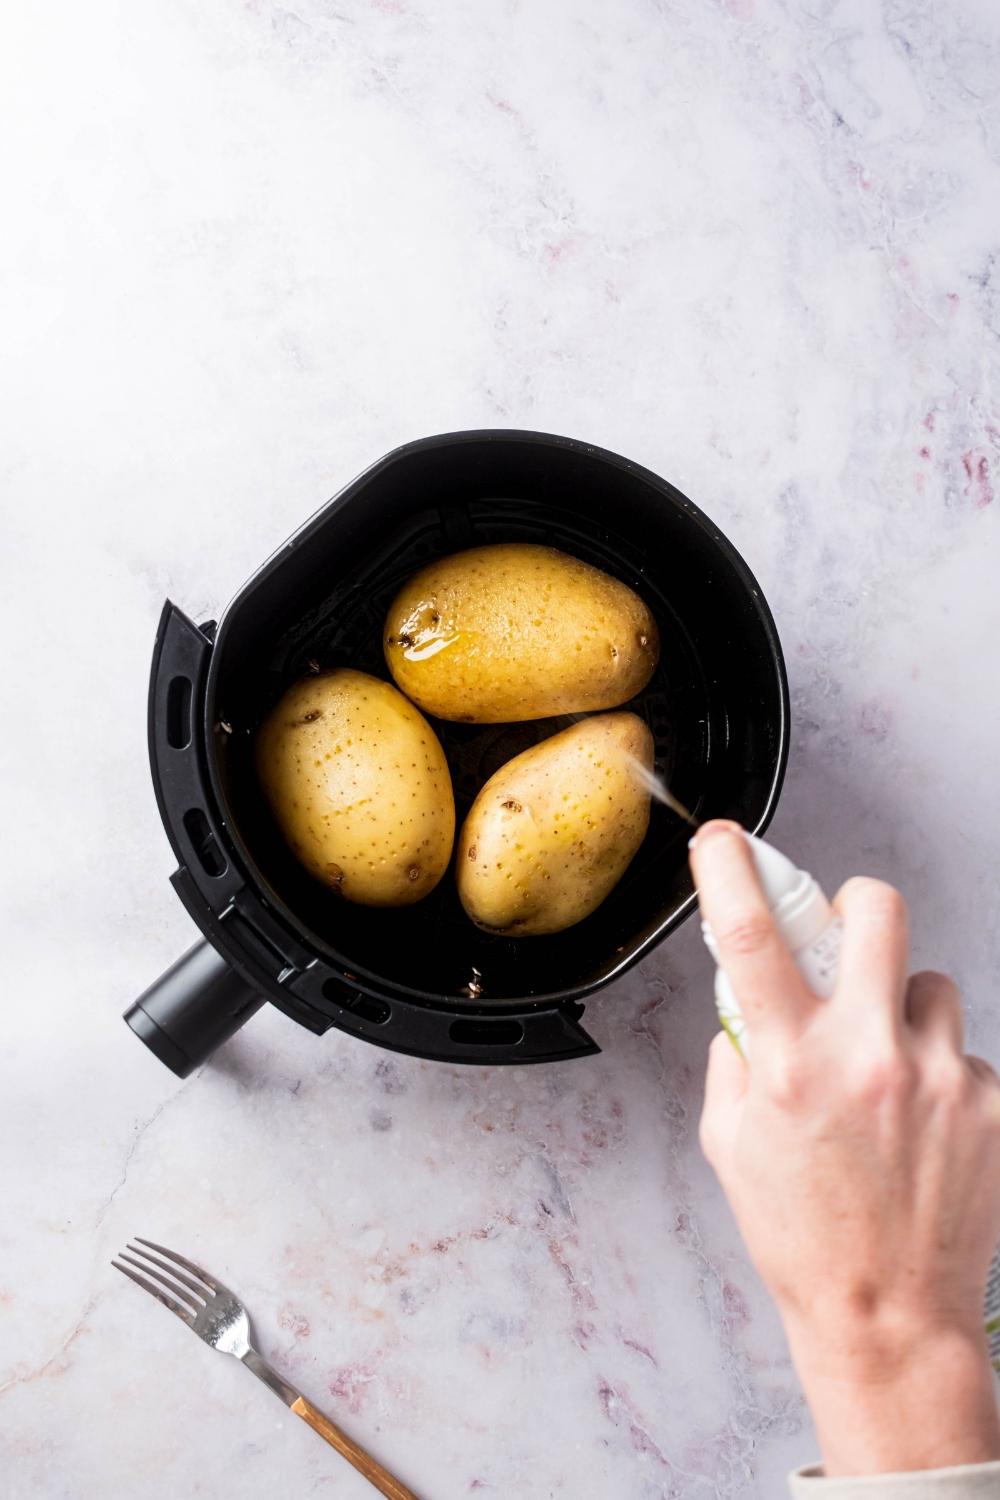 Three potatoes in an air fryer. A hand is holding a bottle of cooking spray and spraying it on the potatoes.